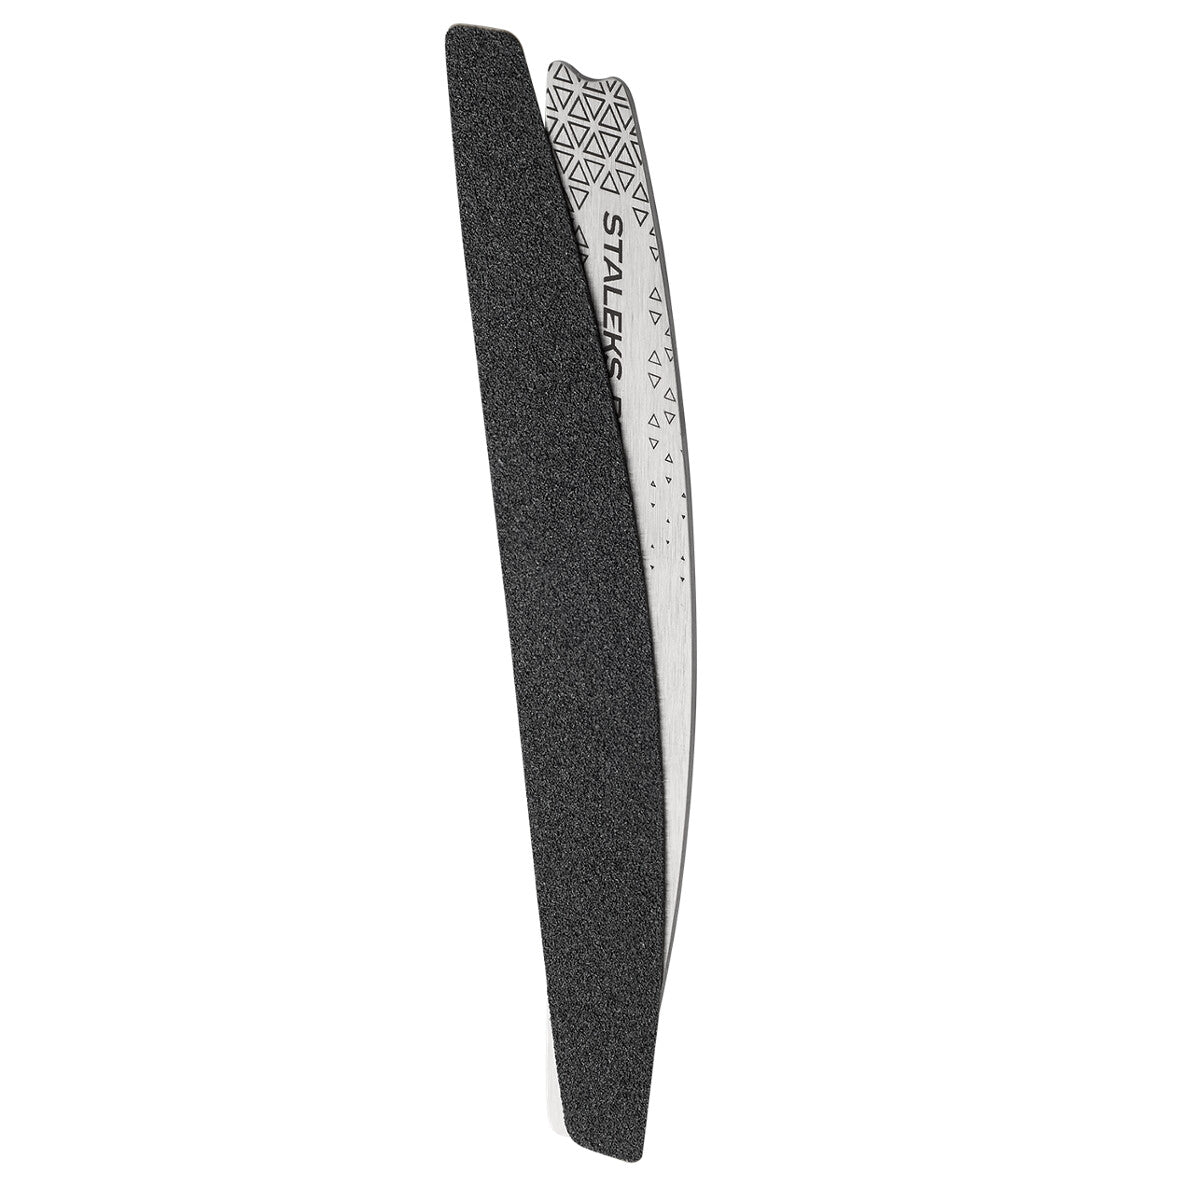    Staleks_Nail_file_metal_crescent_Base_EXPERT_40_MBE-40_4 product view 2